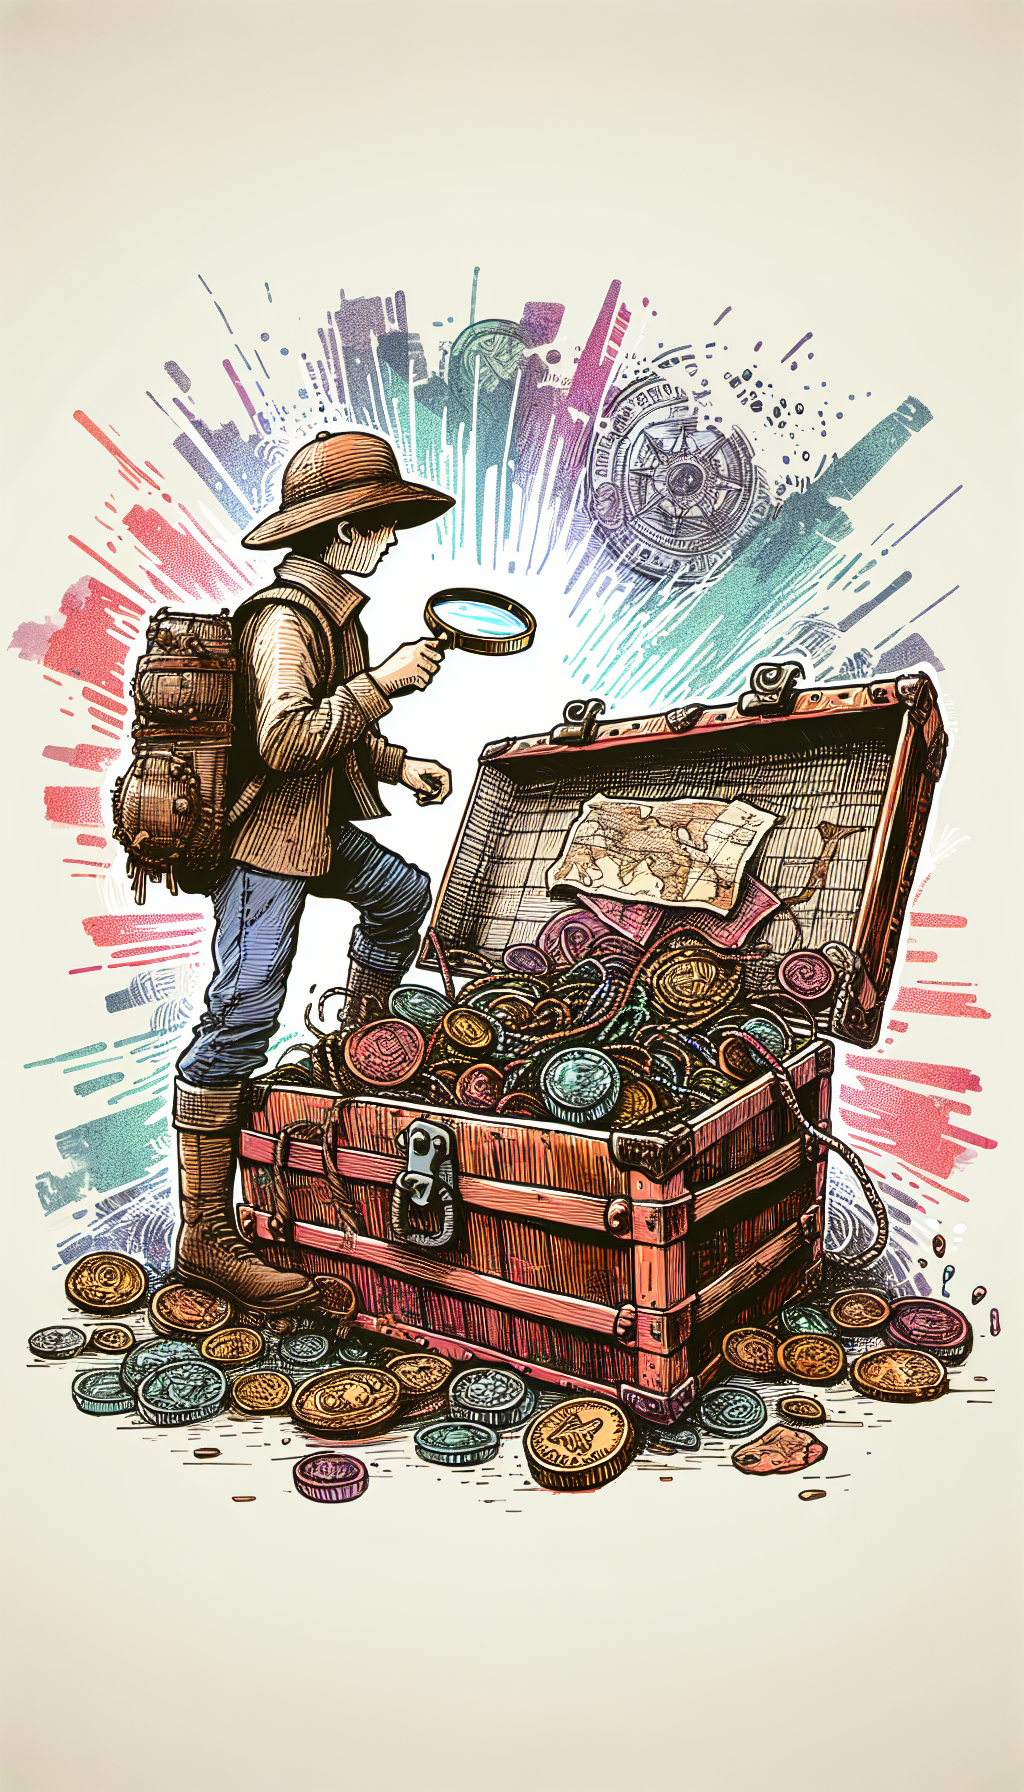 An adventurous explorer, magnifying glass in hand, stands atop an antique trunk that's overflowing with vintage treasures, like old coins, maps, and jewelry. Styled as a whimsical cross-hatch ink drawing transitioning into a vibrant watercolor burst, the scene conveys an exciting quest for valuing the past, with the trunk symbolizing nostalgia's hidden wealth.